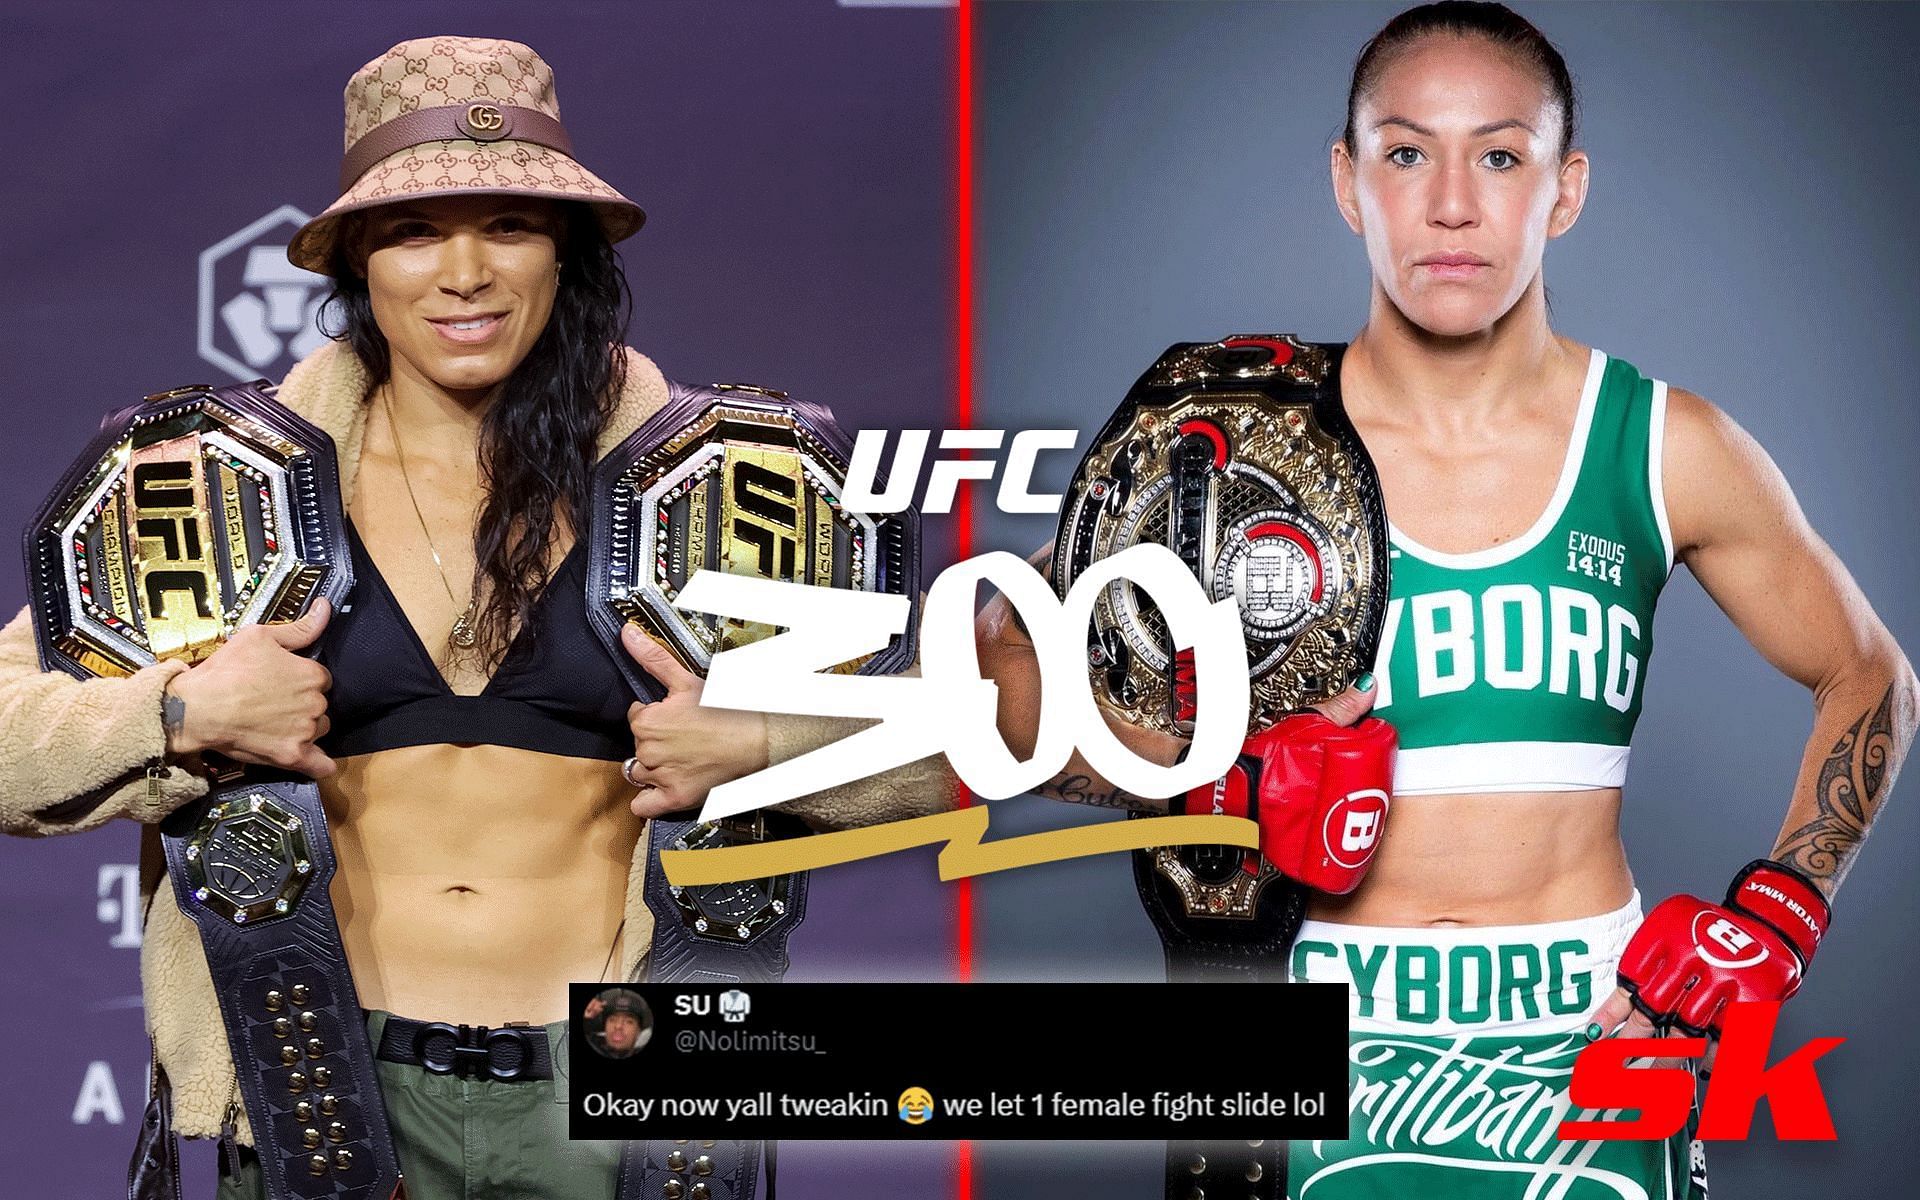 Amanda Nunes (left) has been challenged to a rematch by Cris Cyborg (right) at UFC 300 [Images courtesy: Getty Images and @criscyborg on Instagram; UFC 300 logo via @ufc on Instagram]